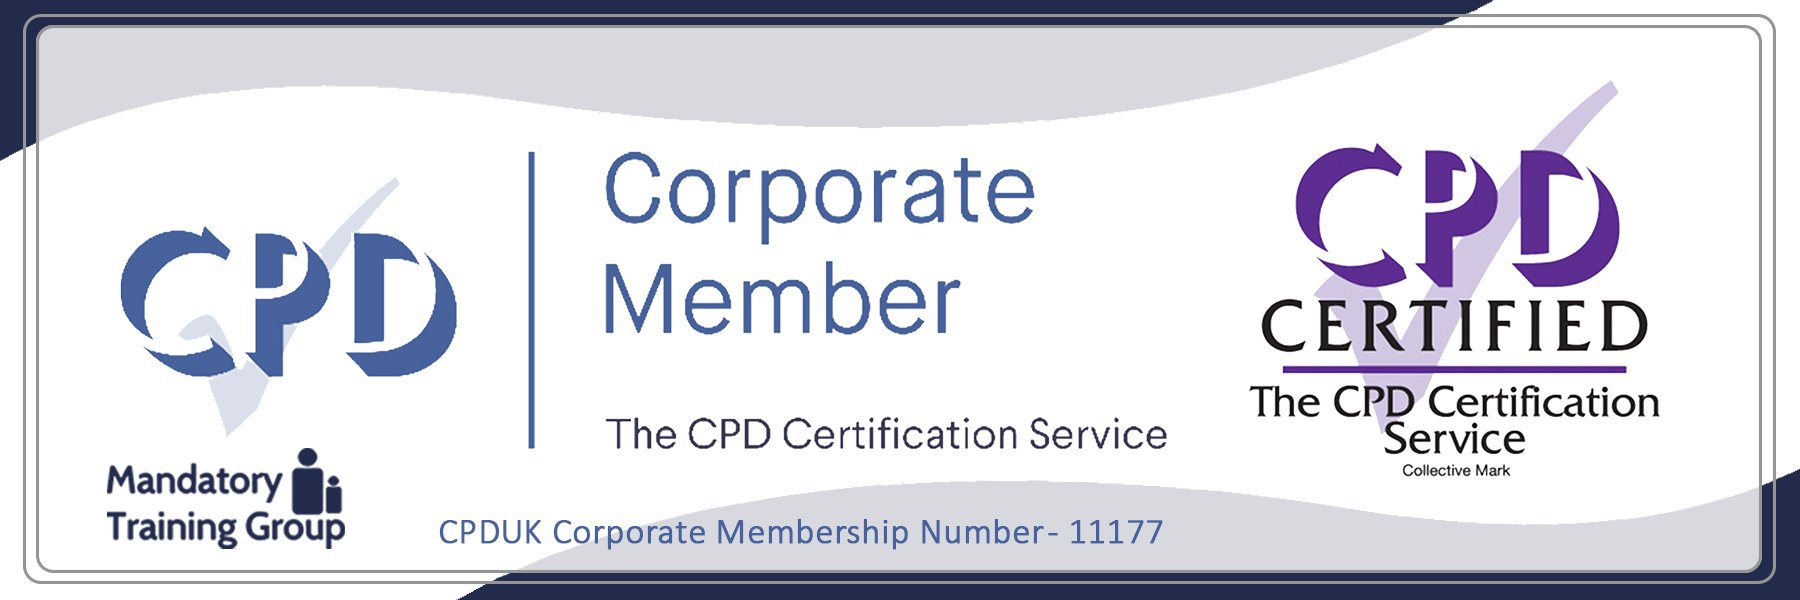 Business Compliance Courses for Employees - Online CPD Training Package - The Mandatory Training Group UK -